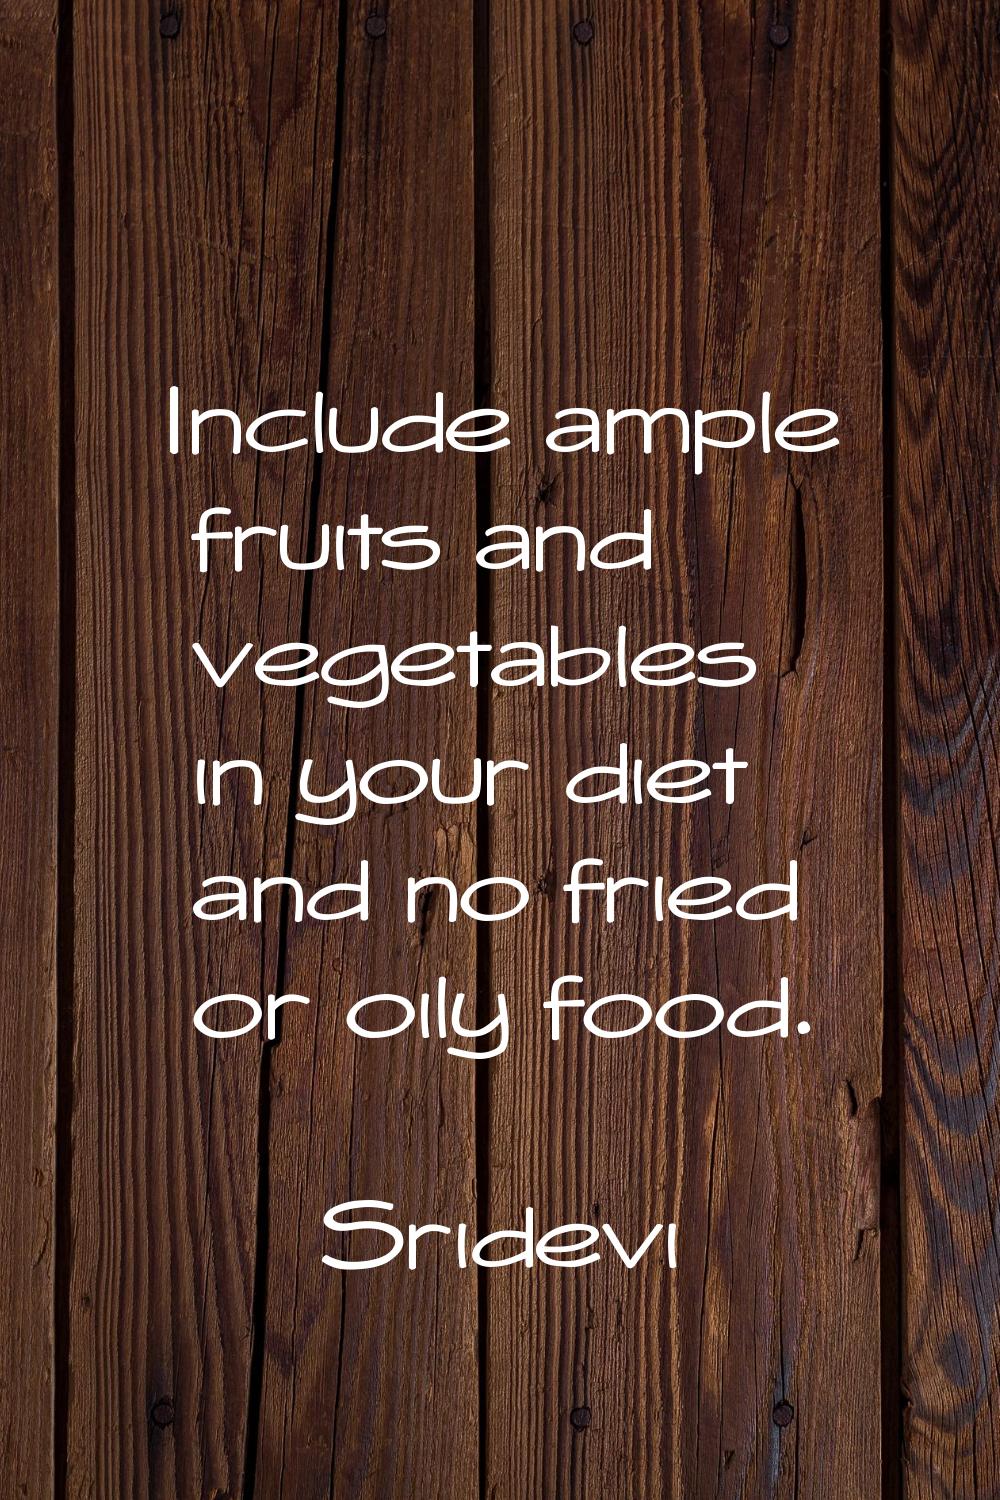 Include ample fruits and vegetables in your diet and no fried or oily food.